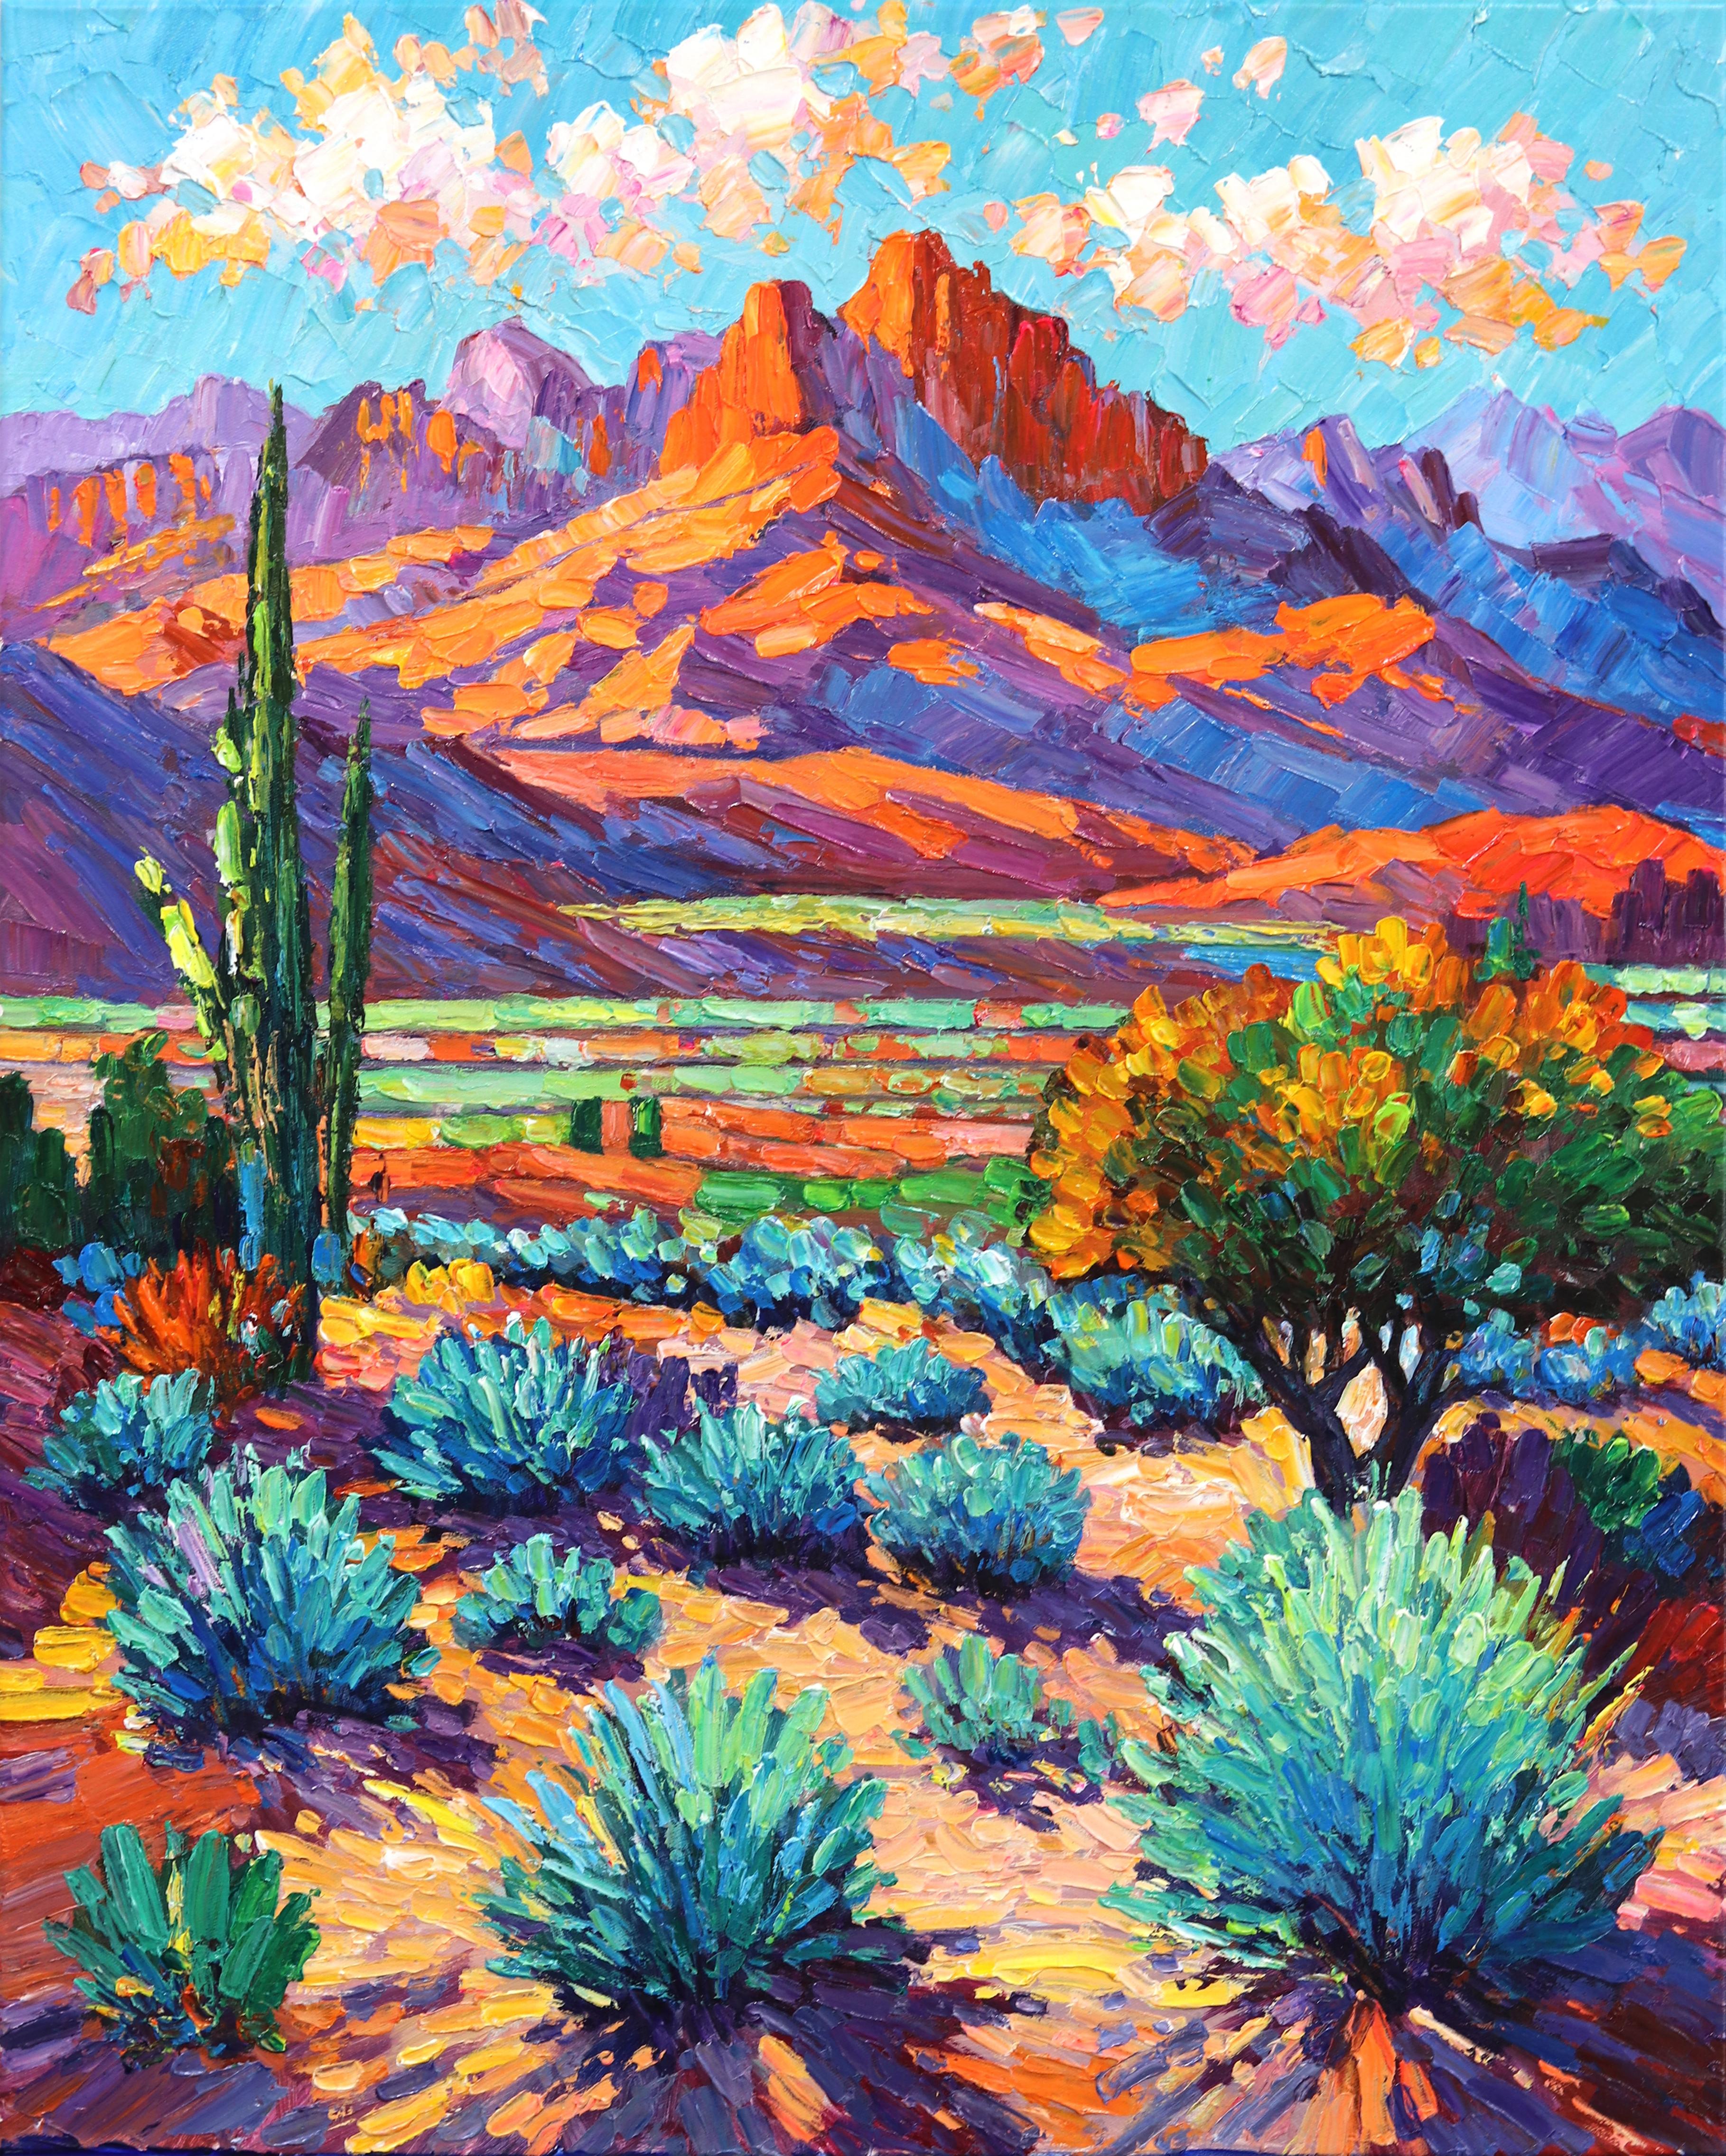 Katharina Husslein Figurative Painting - A Spark in the Sky - Vibrant Textural Mountain Desert Landscape Oil Painting